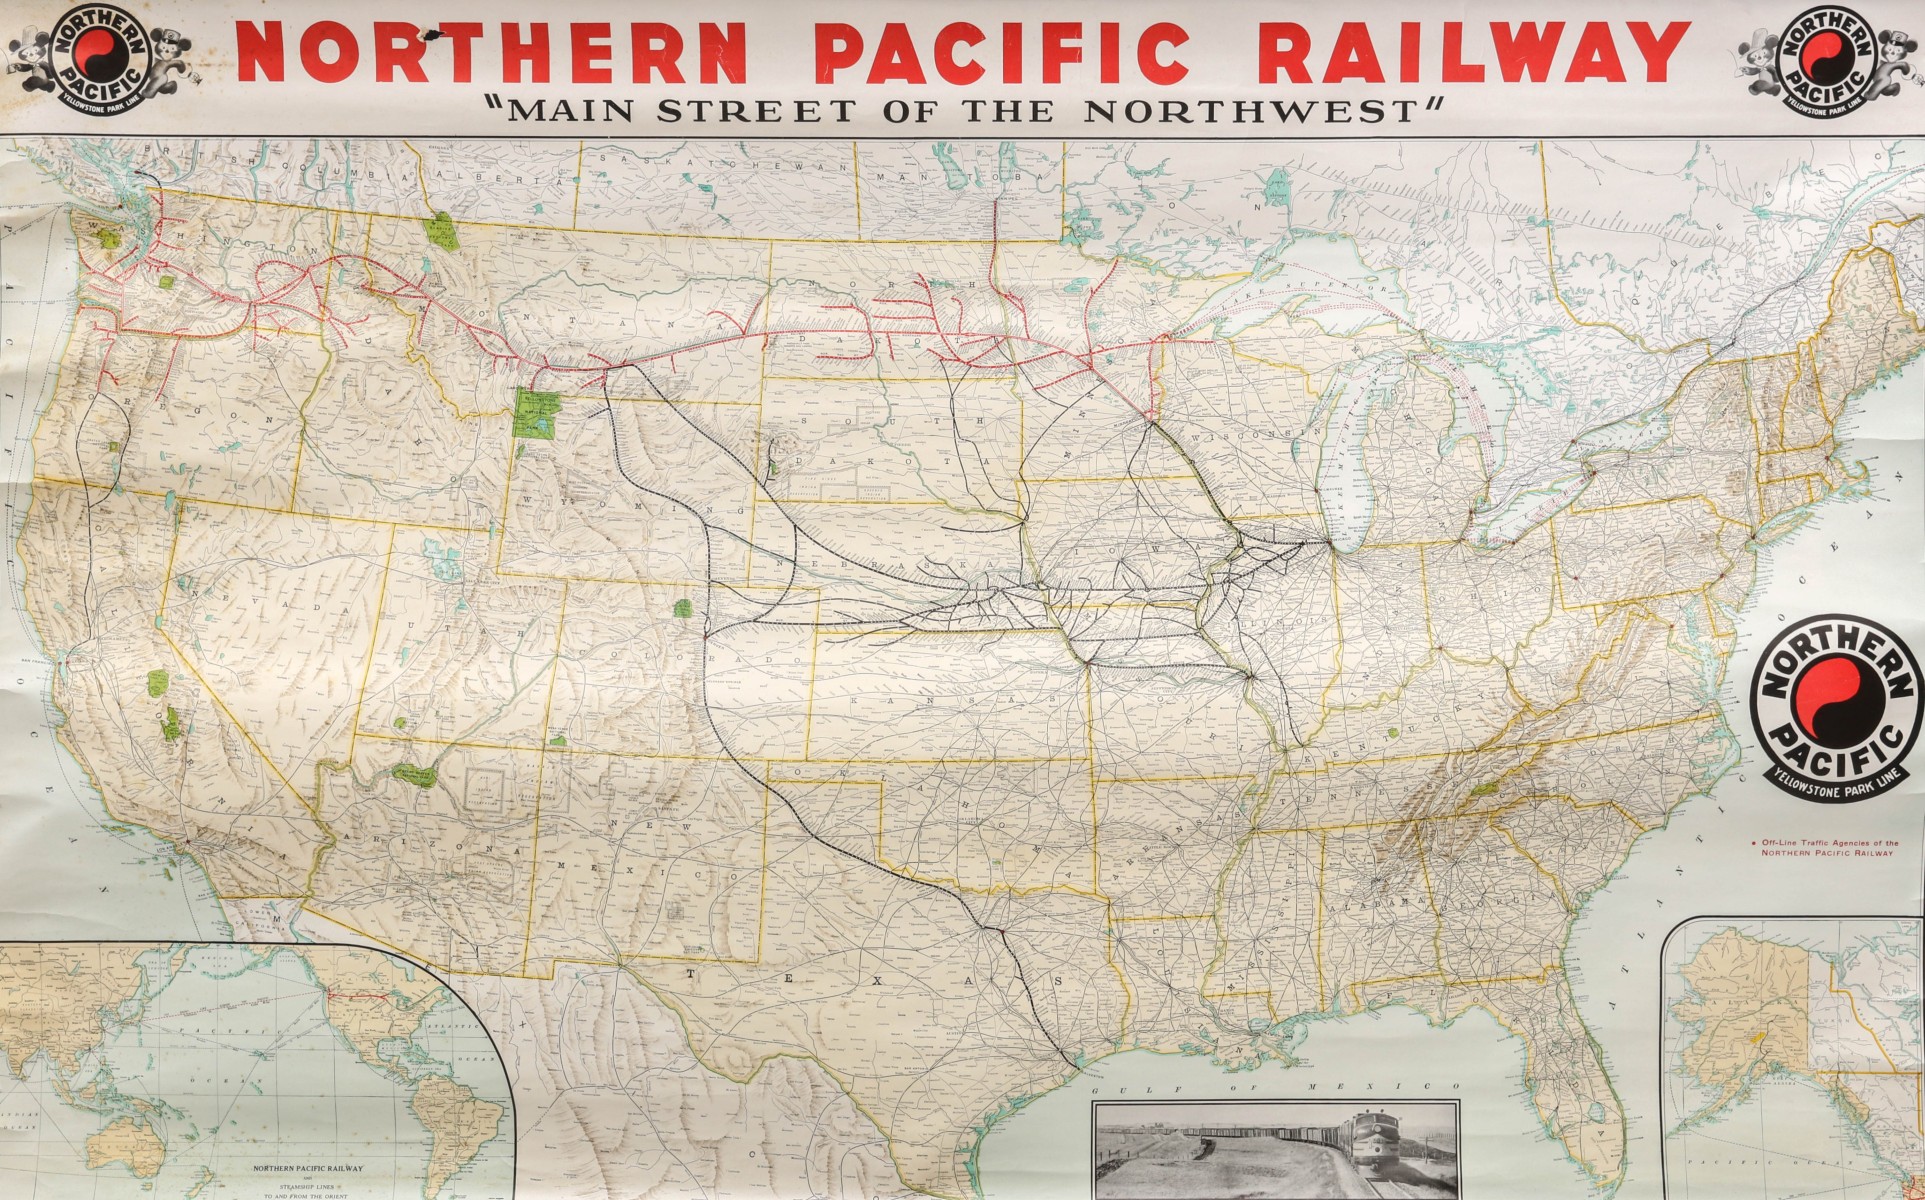 A 1936 NORTHERN PACIFIC 'YELLOWSTONE PARK LINE' RR MAP